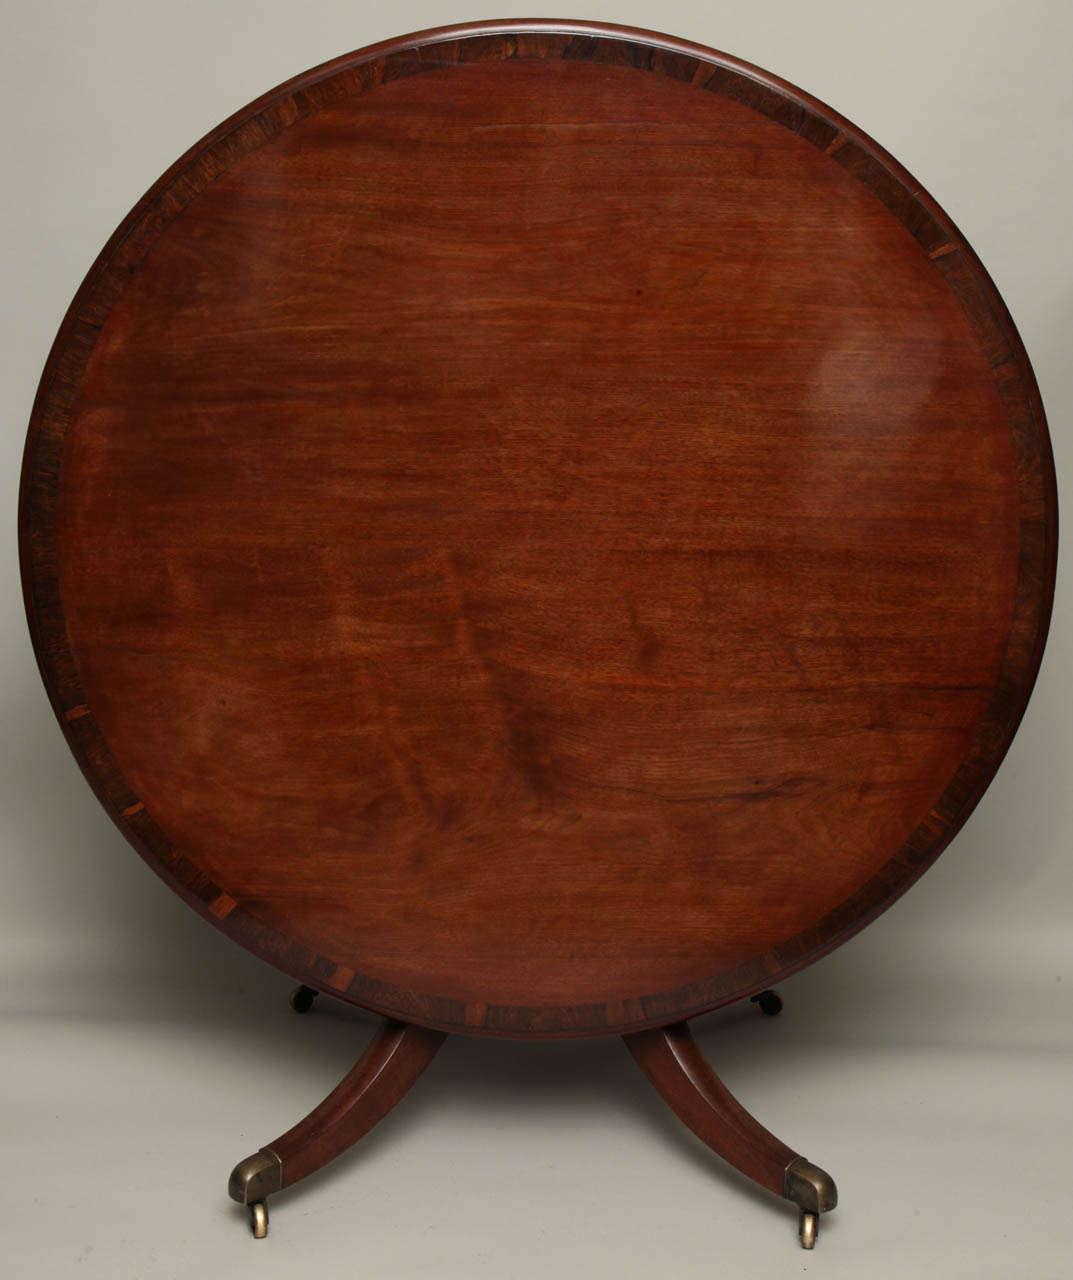 A very fine George III period solid and well figured mahogany breakfast table with rosewood banding, the bold top over urn shaft on lovely molded down swept legs ending in original brass castors, the whole with good rich color and patination.